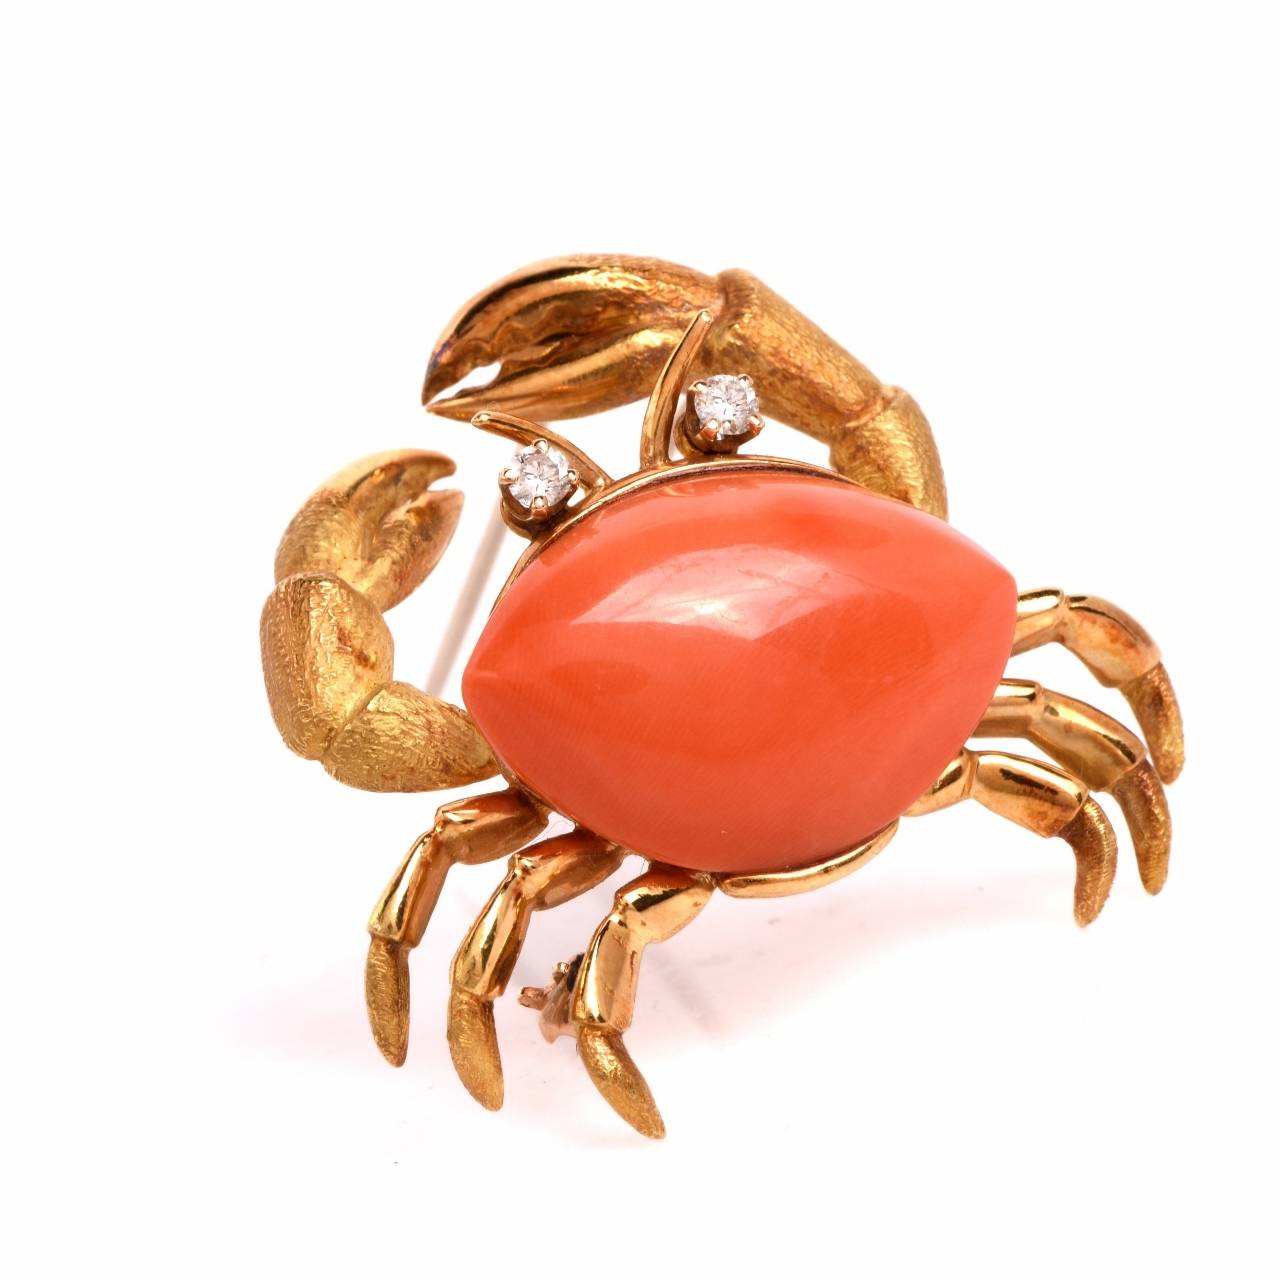 This authentic Tiffany & Co. lapel brooch from the vintage Retro era is crafted in solid 18K polished and matted yellow gold. Depicting the anatomically accurate sculptured silhouette of a crab, this designer brooch exposes a marquise-shaped coral